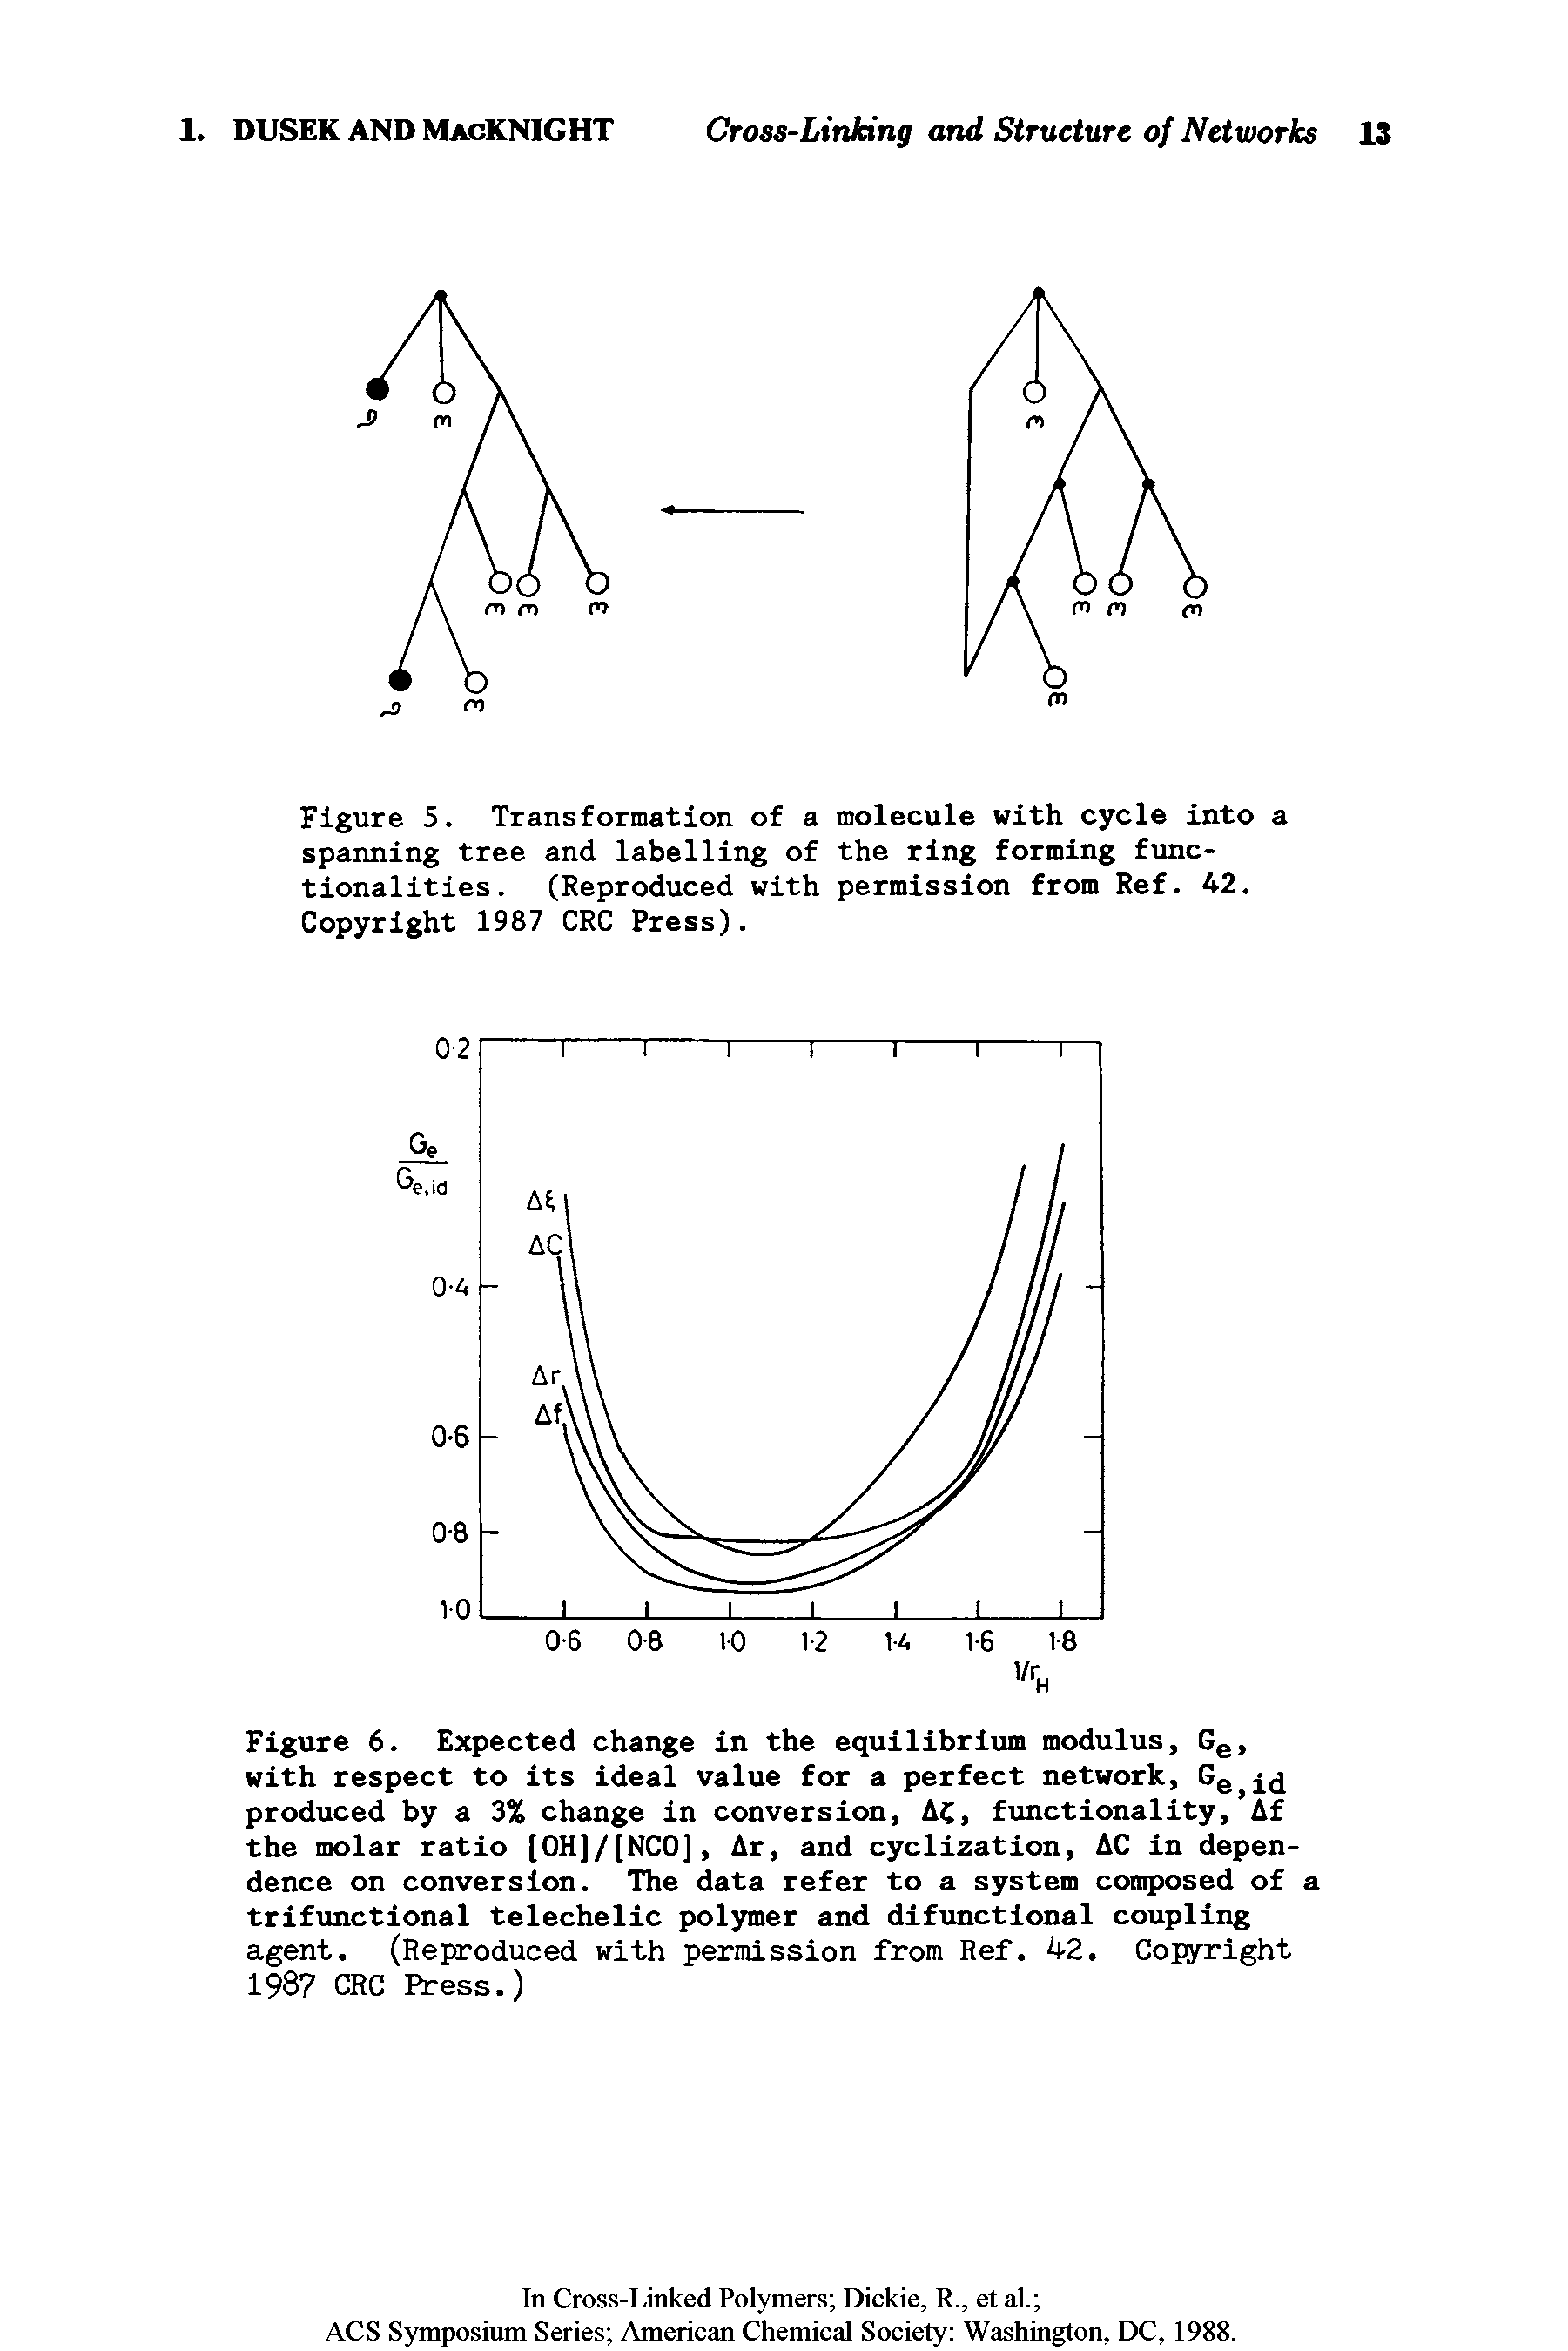 Figure 6. Expected change in the equilibrium modulus, Gg, with respect to its ideal value for a perfect network, Gg produced by a 3% change in conversion, AC, functionality, Af the molar ratio [OH]/[NCO], Ar, and cyclization, AC in dependence on conversion. The data refer to a system composed of. trifunctional telechelic polymer and difunctional coupling agent. (Reproduced with permission from Ref. 42. Copyright 1987 CRC Press.)...